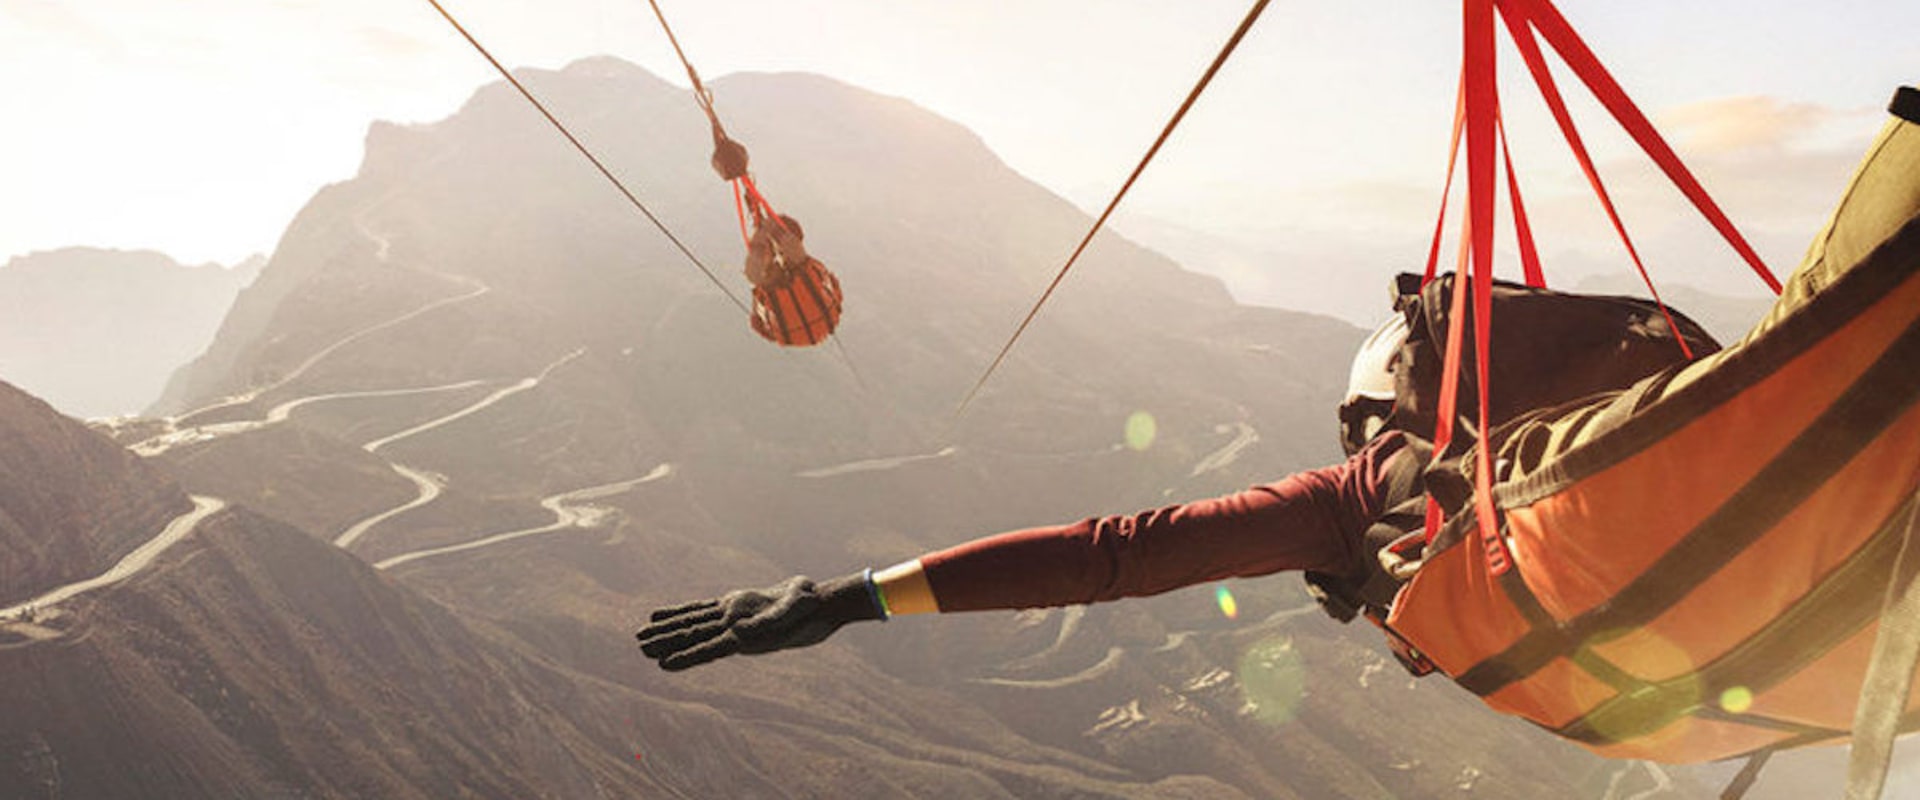 Where is the best zipline in the world?